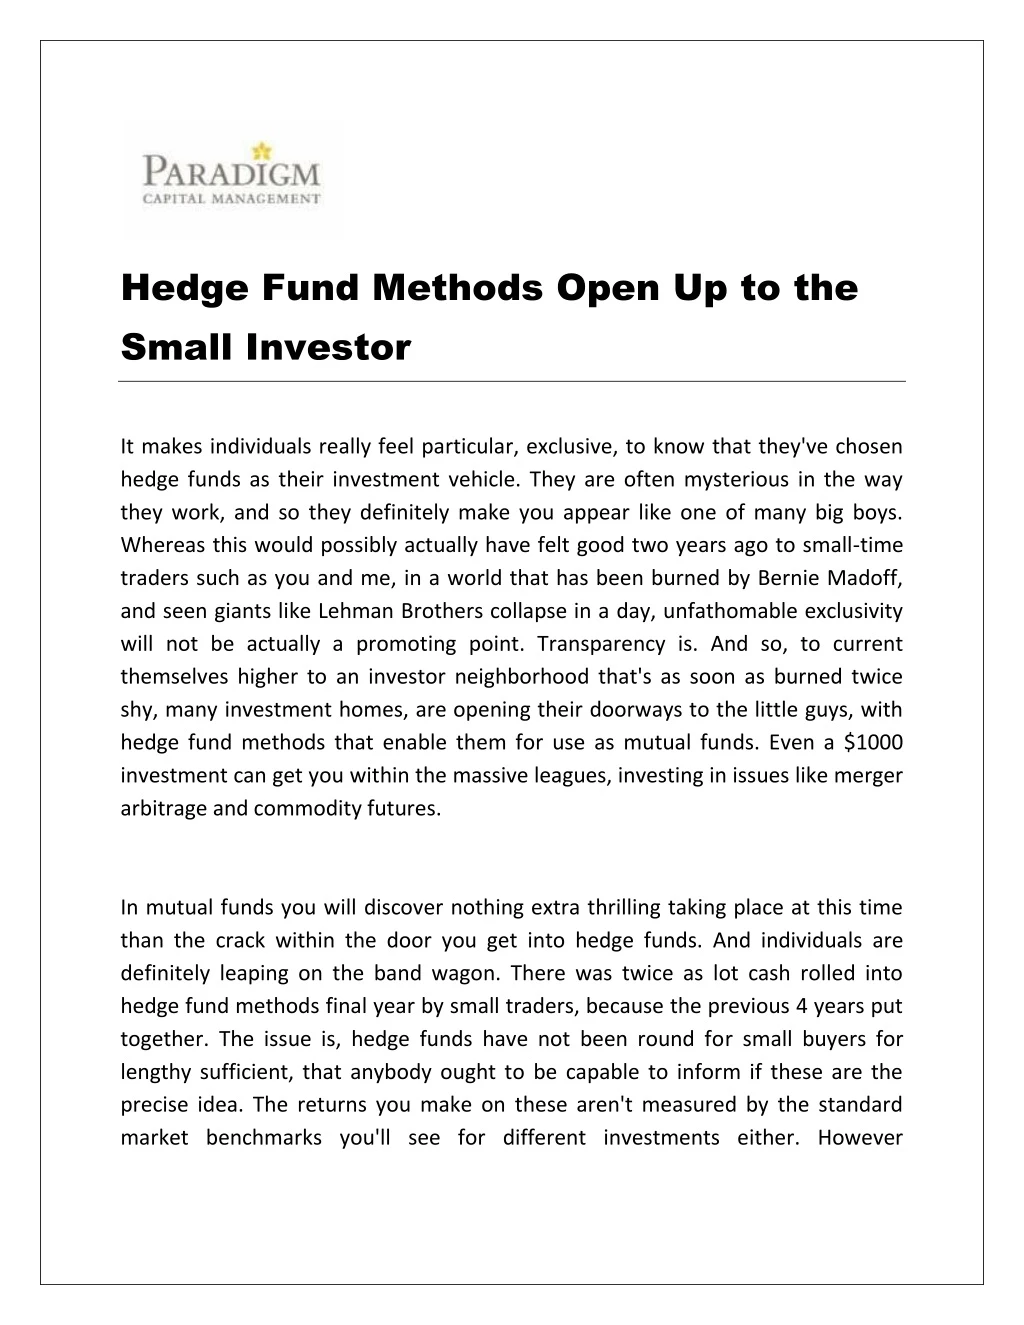 hedge fund methods open up to the small investor